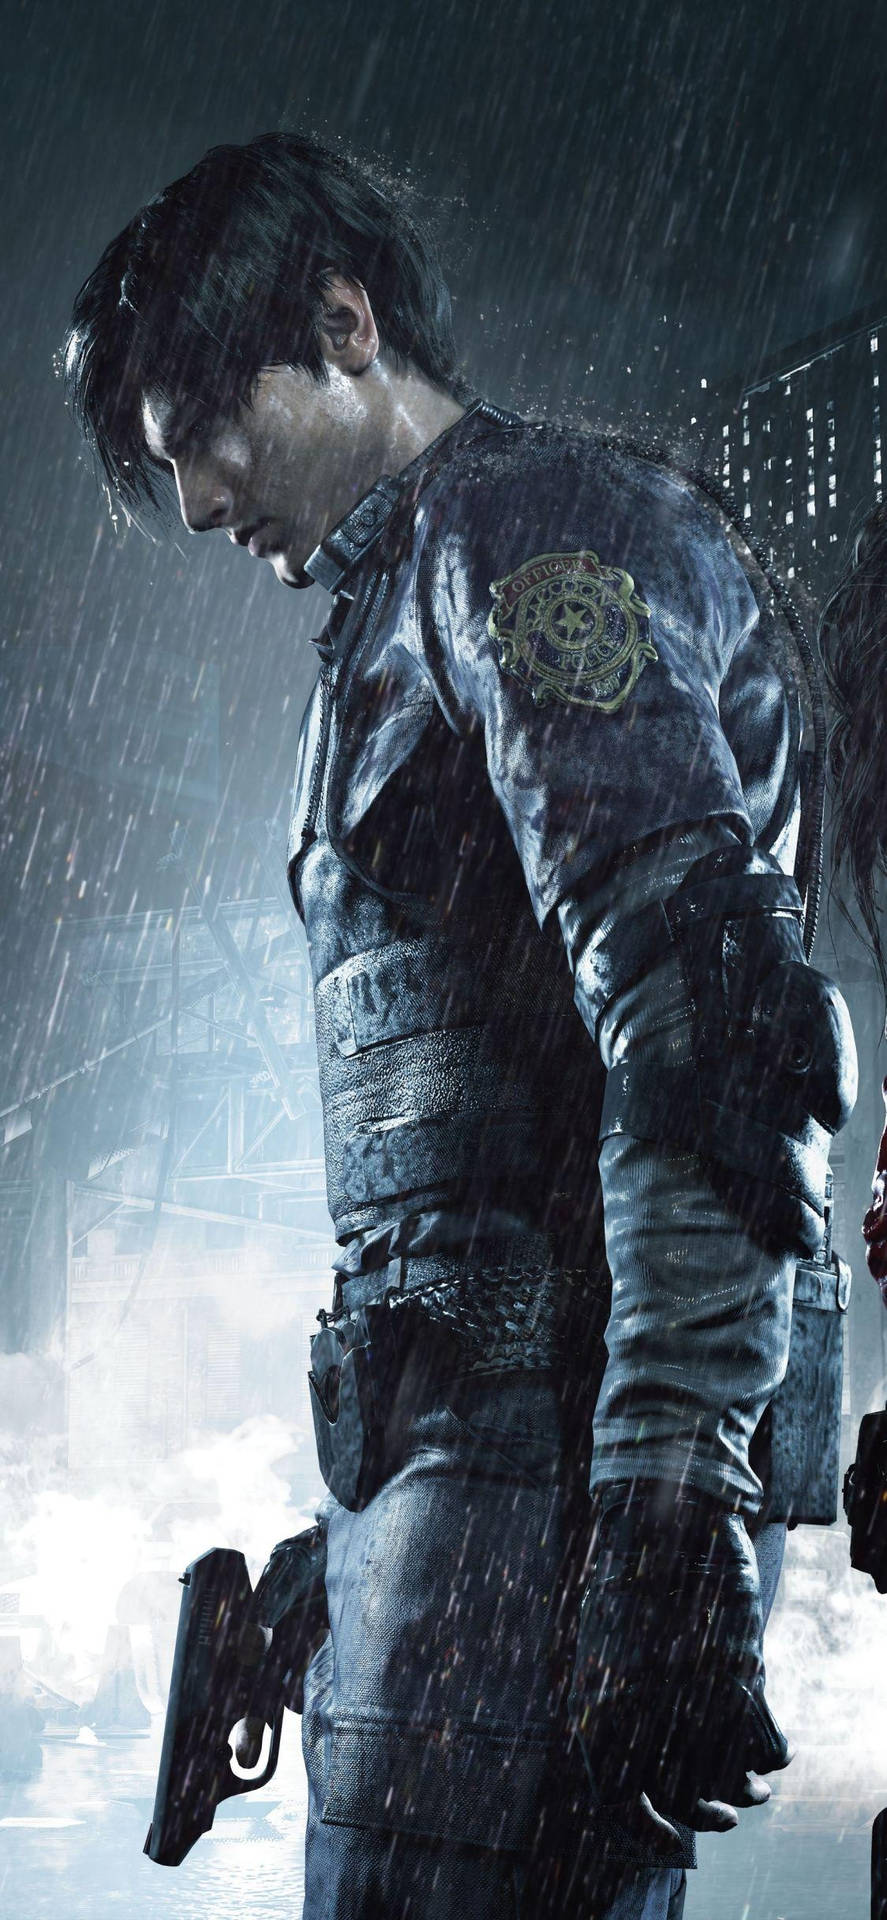 Leon S. Kennedy takes on the undead in the iconic Resident Evil 2 Remake Wallpaper